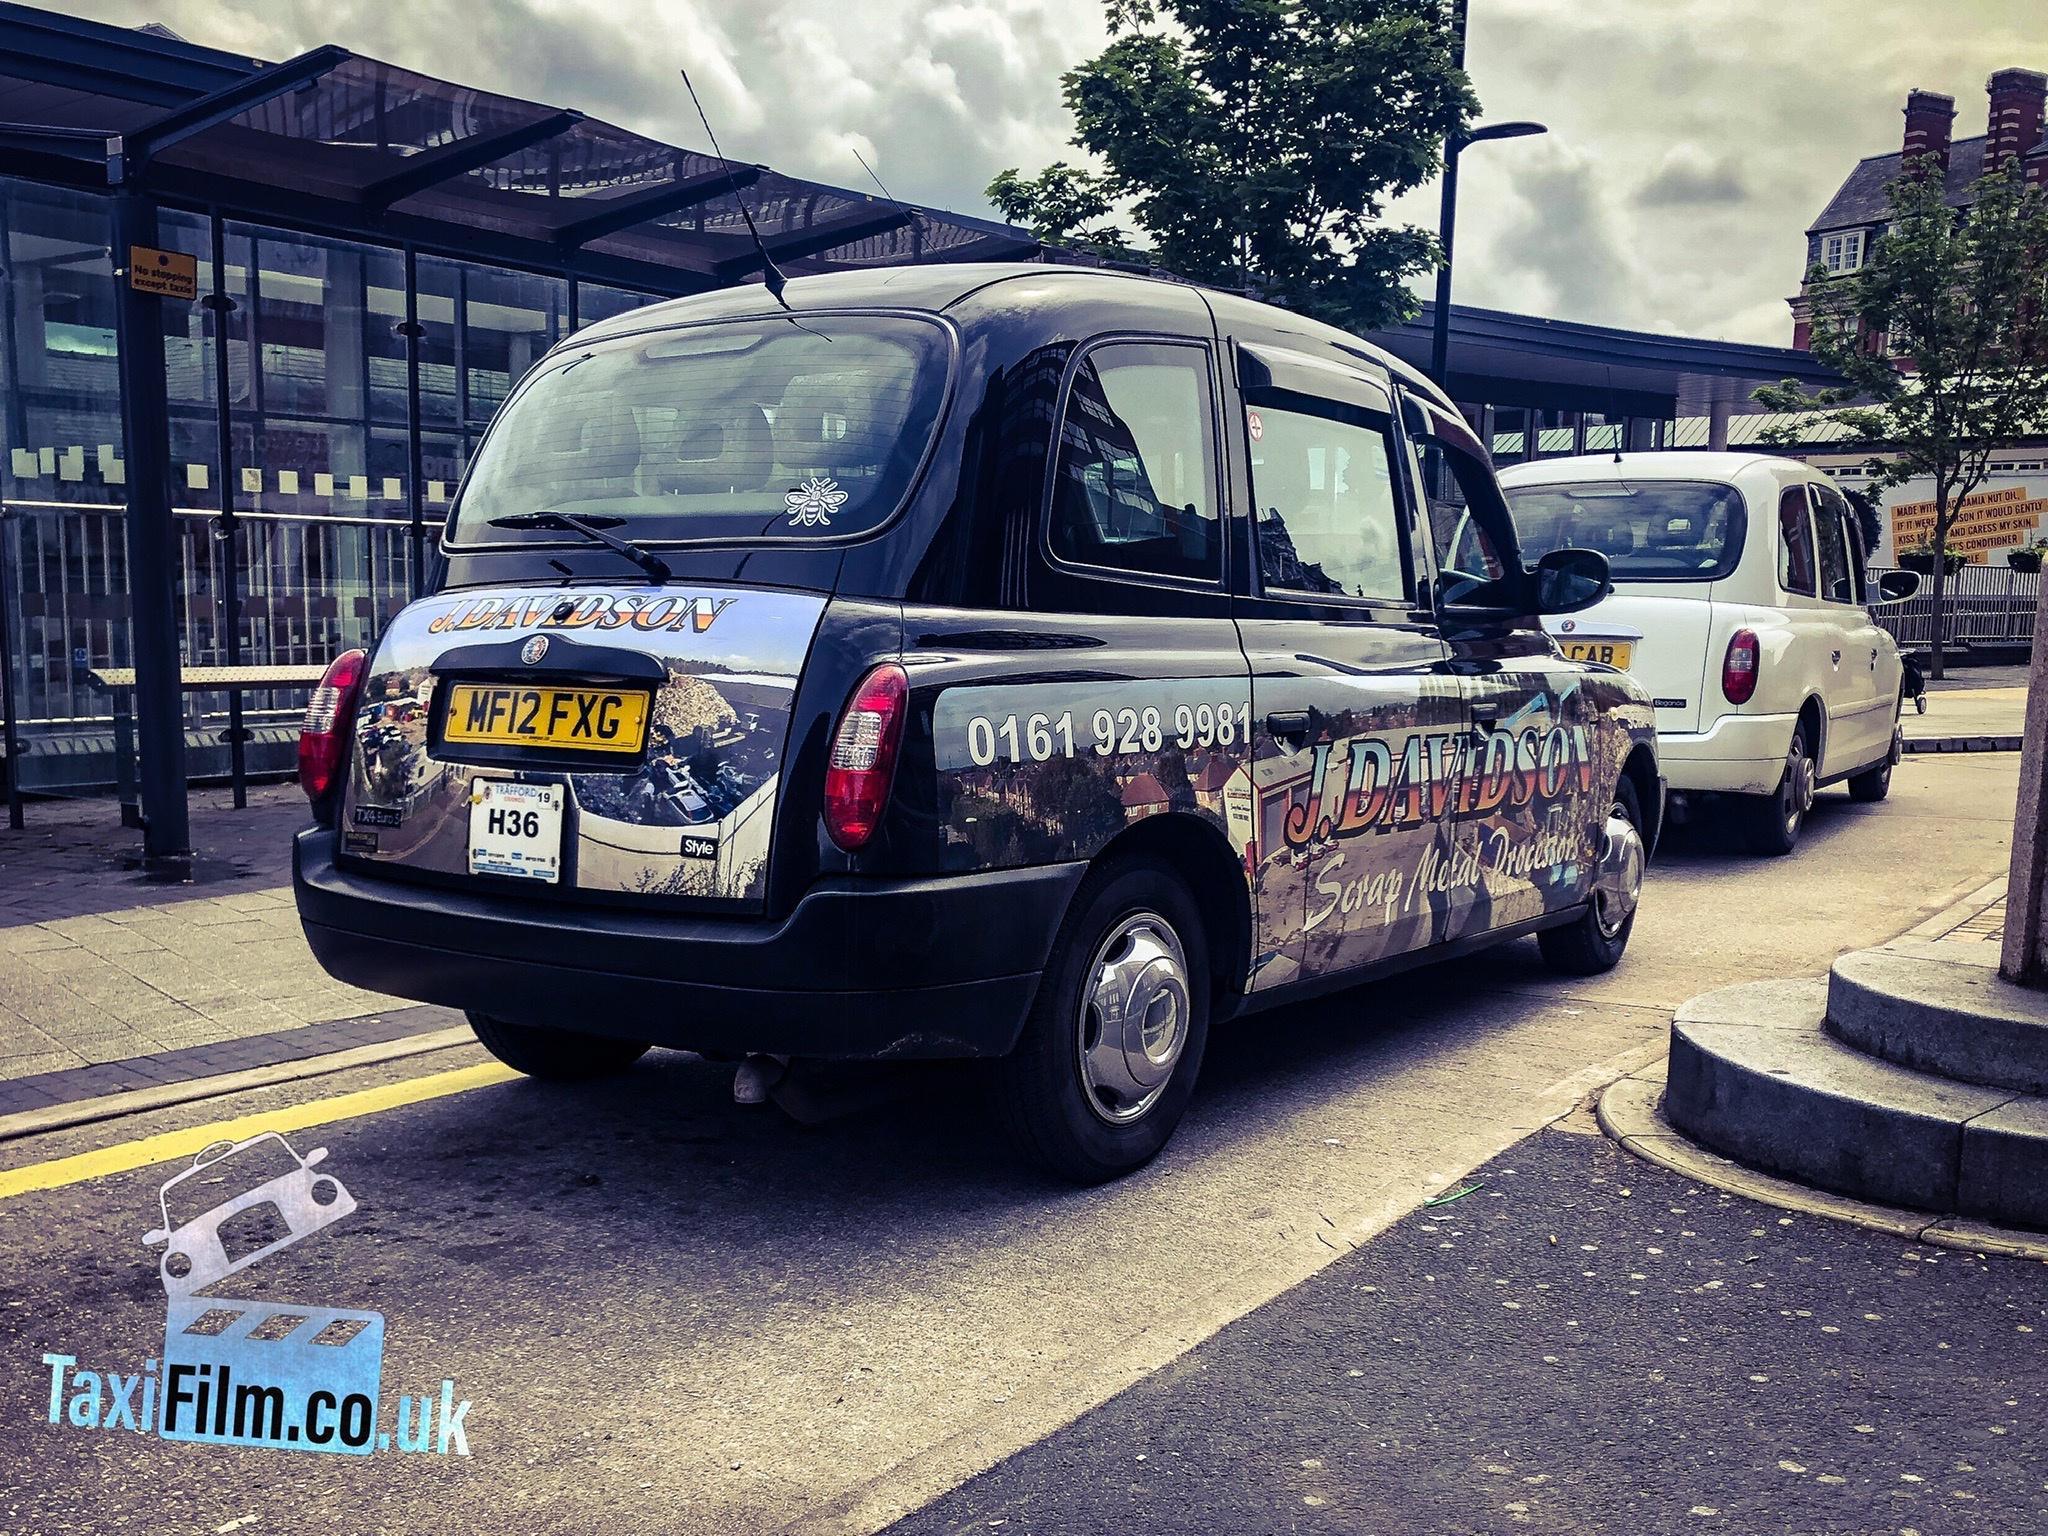 Black Tx4 Ads Taxi, 2012, Manchester
ref M0006